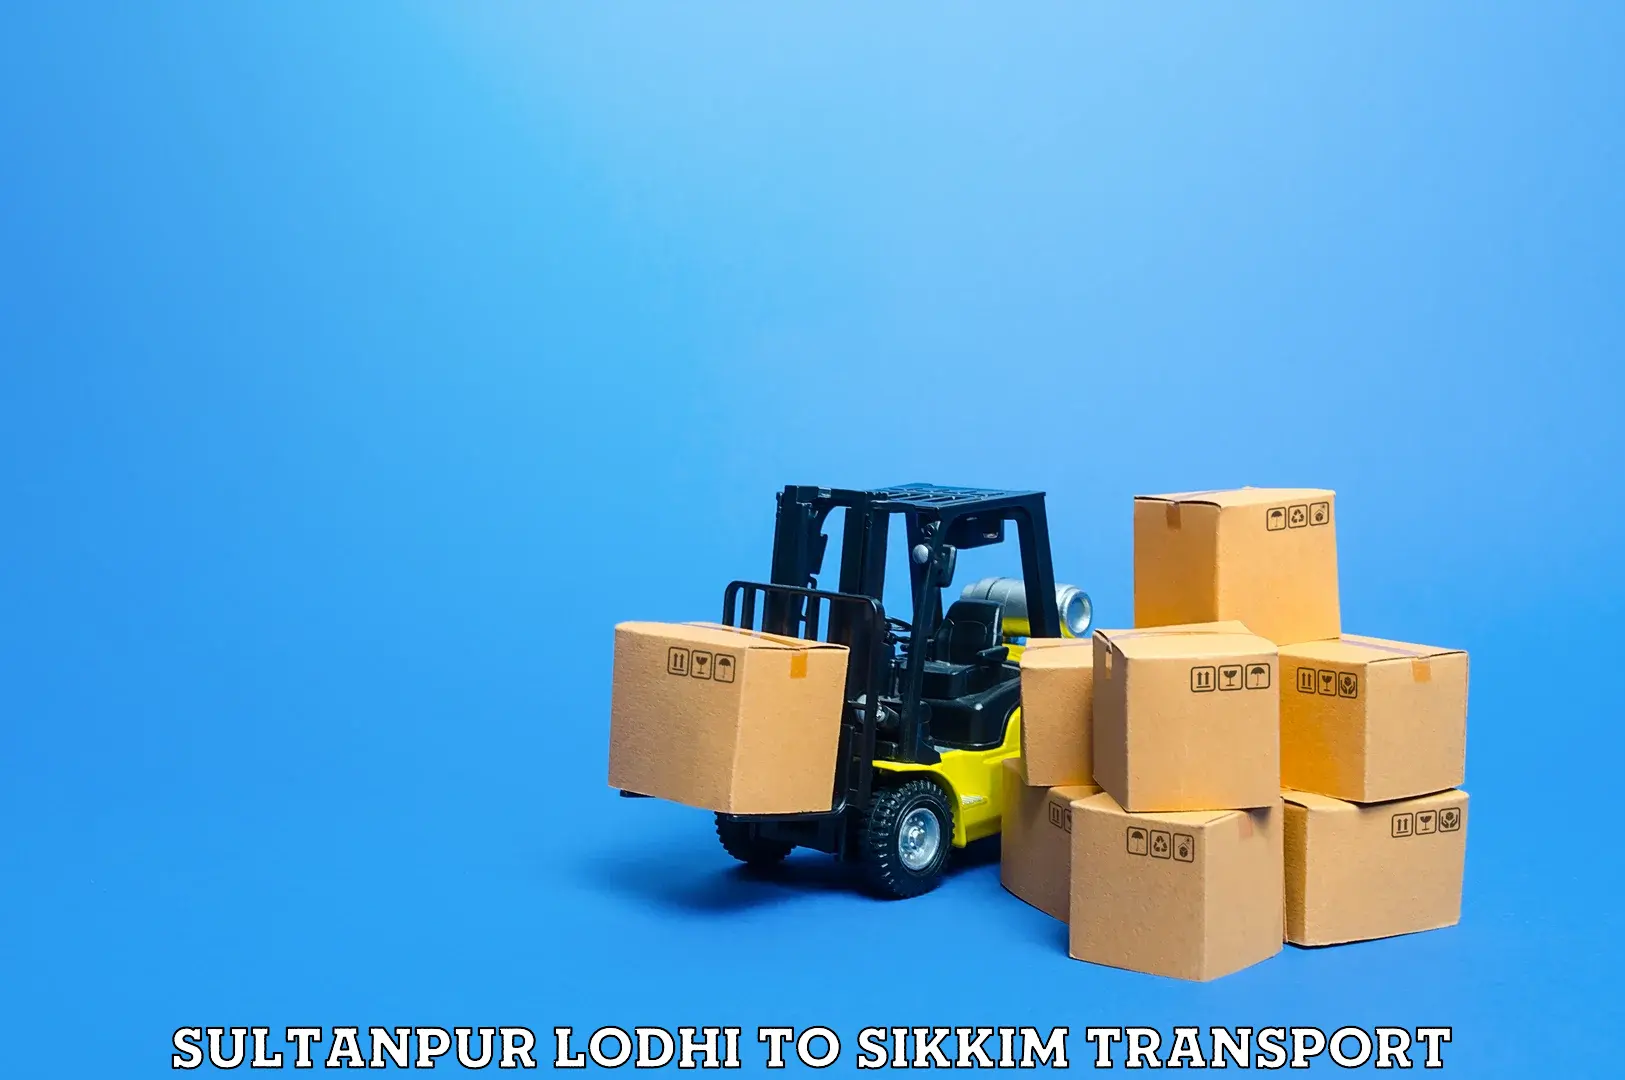 Express transport services in Sultanpur Lodhi to Gangtok